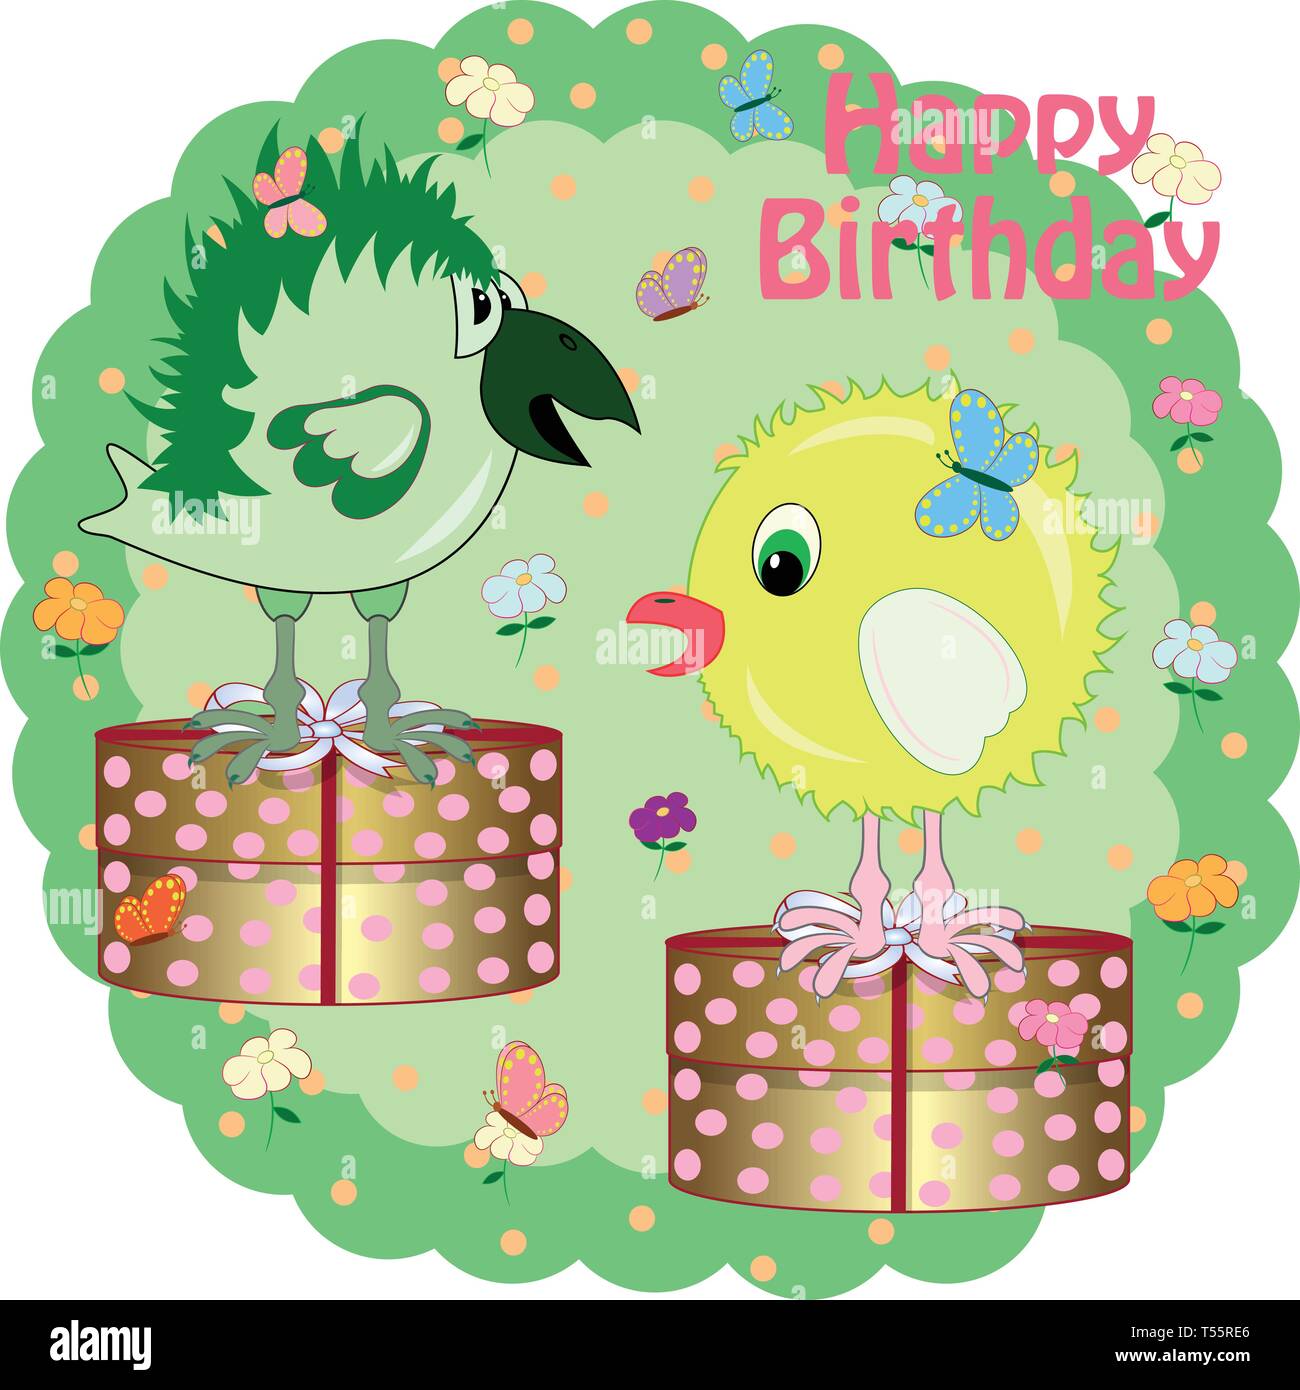 Birthday Greeting Card With Crow And Chicken Cartoon Vector Illustrator Stock Vector Image Art Alamy